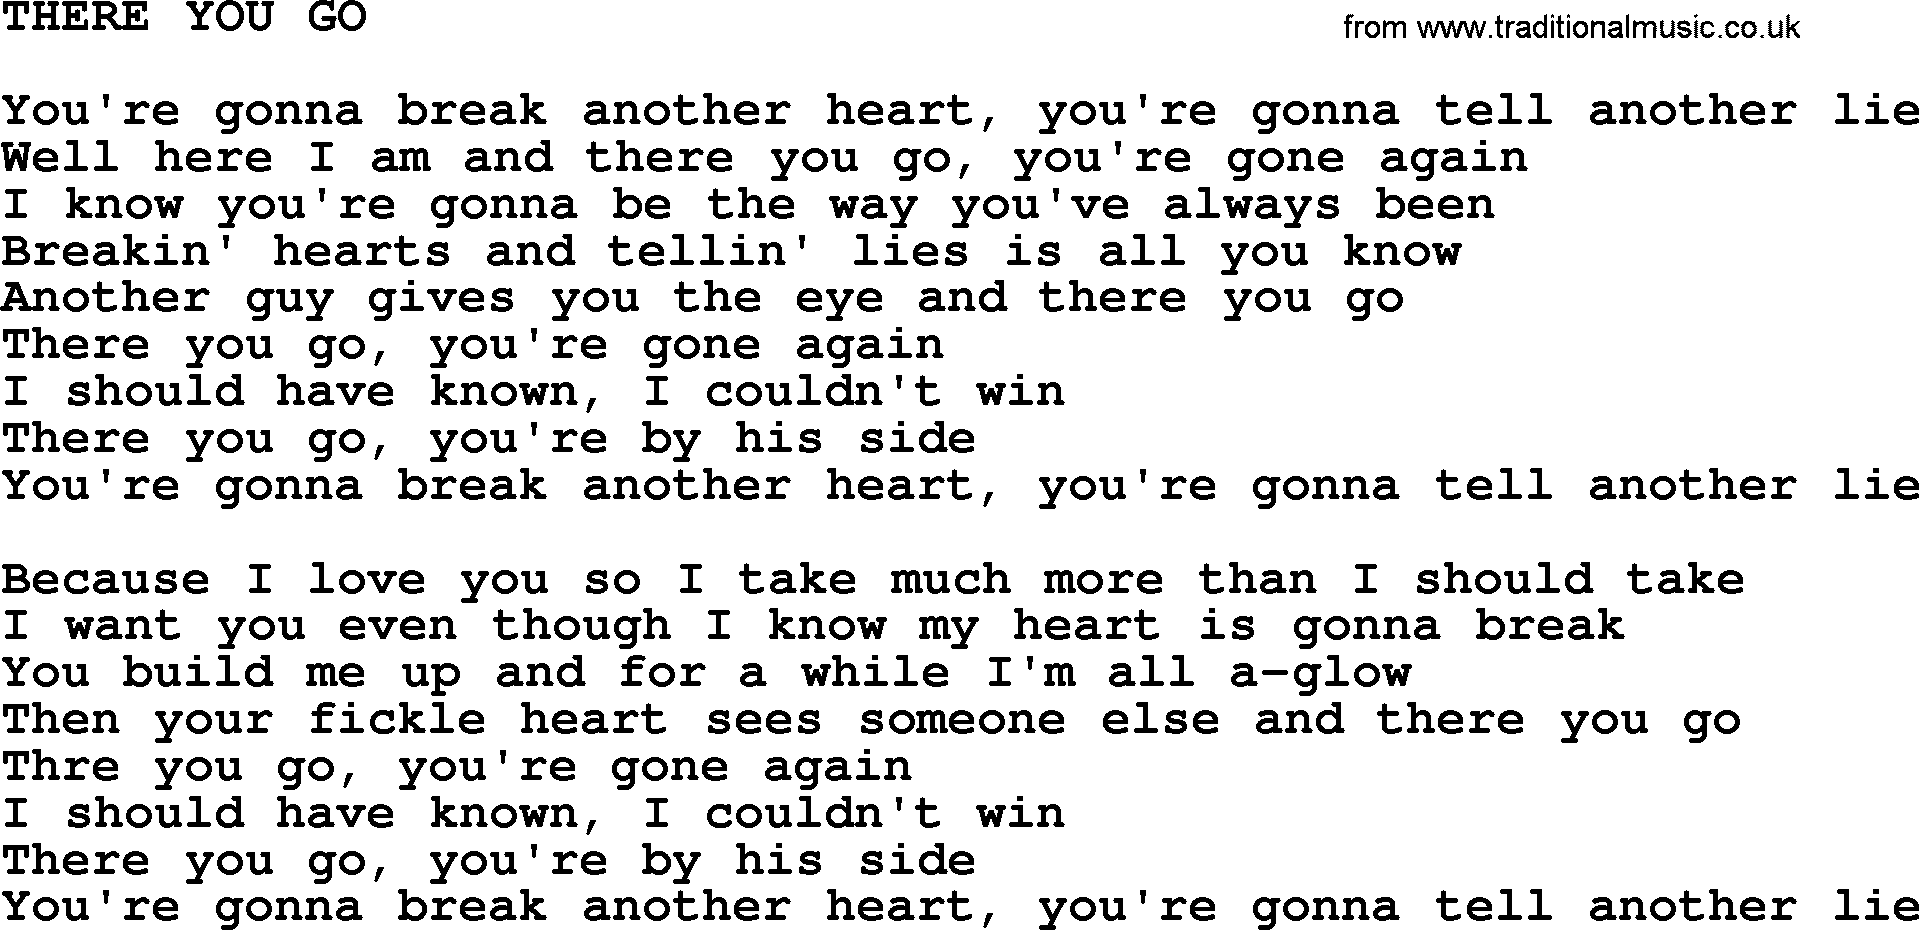 Johnny Cash song There You Go.txt lyrics